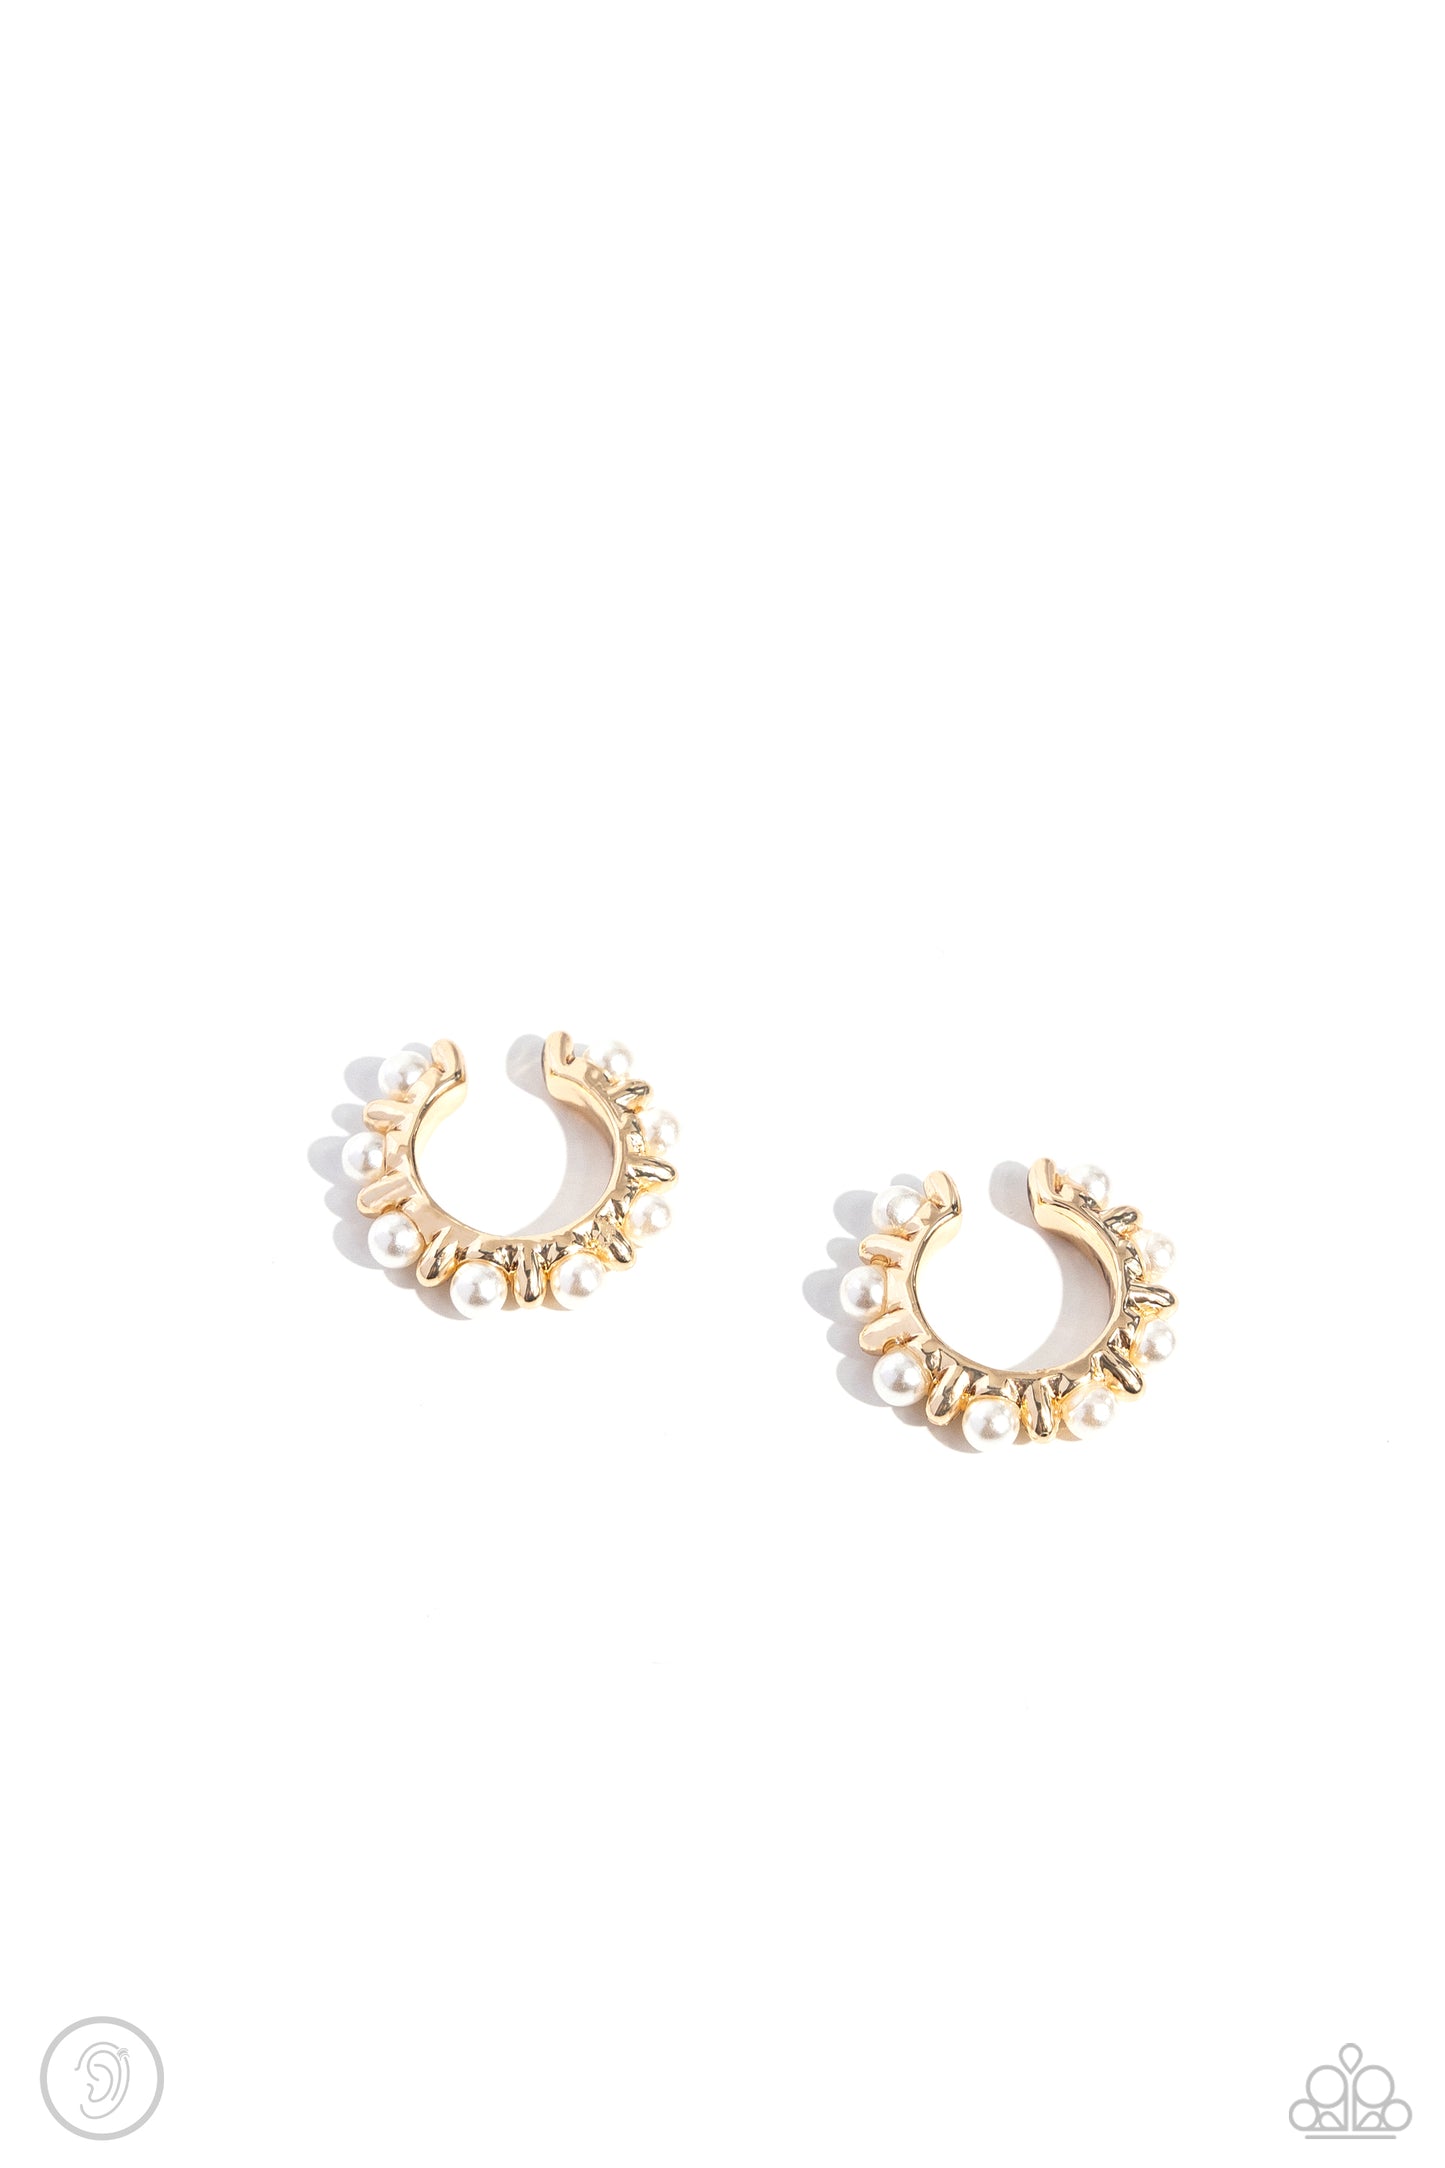 <p>Paparazzi Accessories - Bubbly Basic - Gold Pearl Ear Cuffs Glossy white pearls alternate with high-sheen gold spikes that curl around the ear in a refined pattern, creating an adjustable, one-size-fits-all cuff.</p> <div>Sold as one pair of cuff earrings.</div>